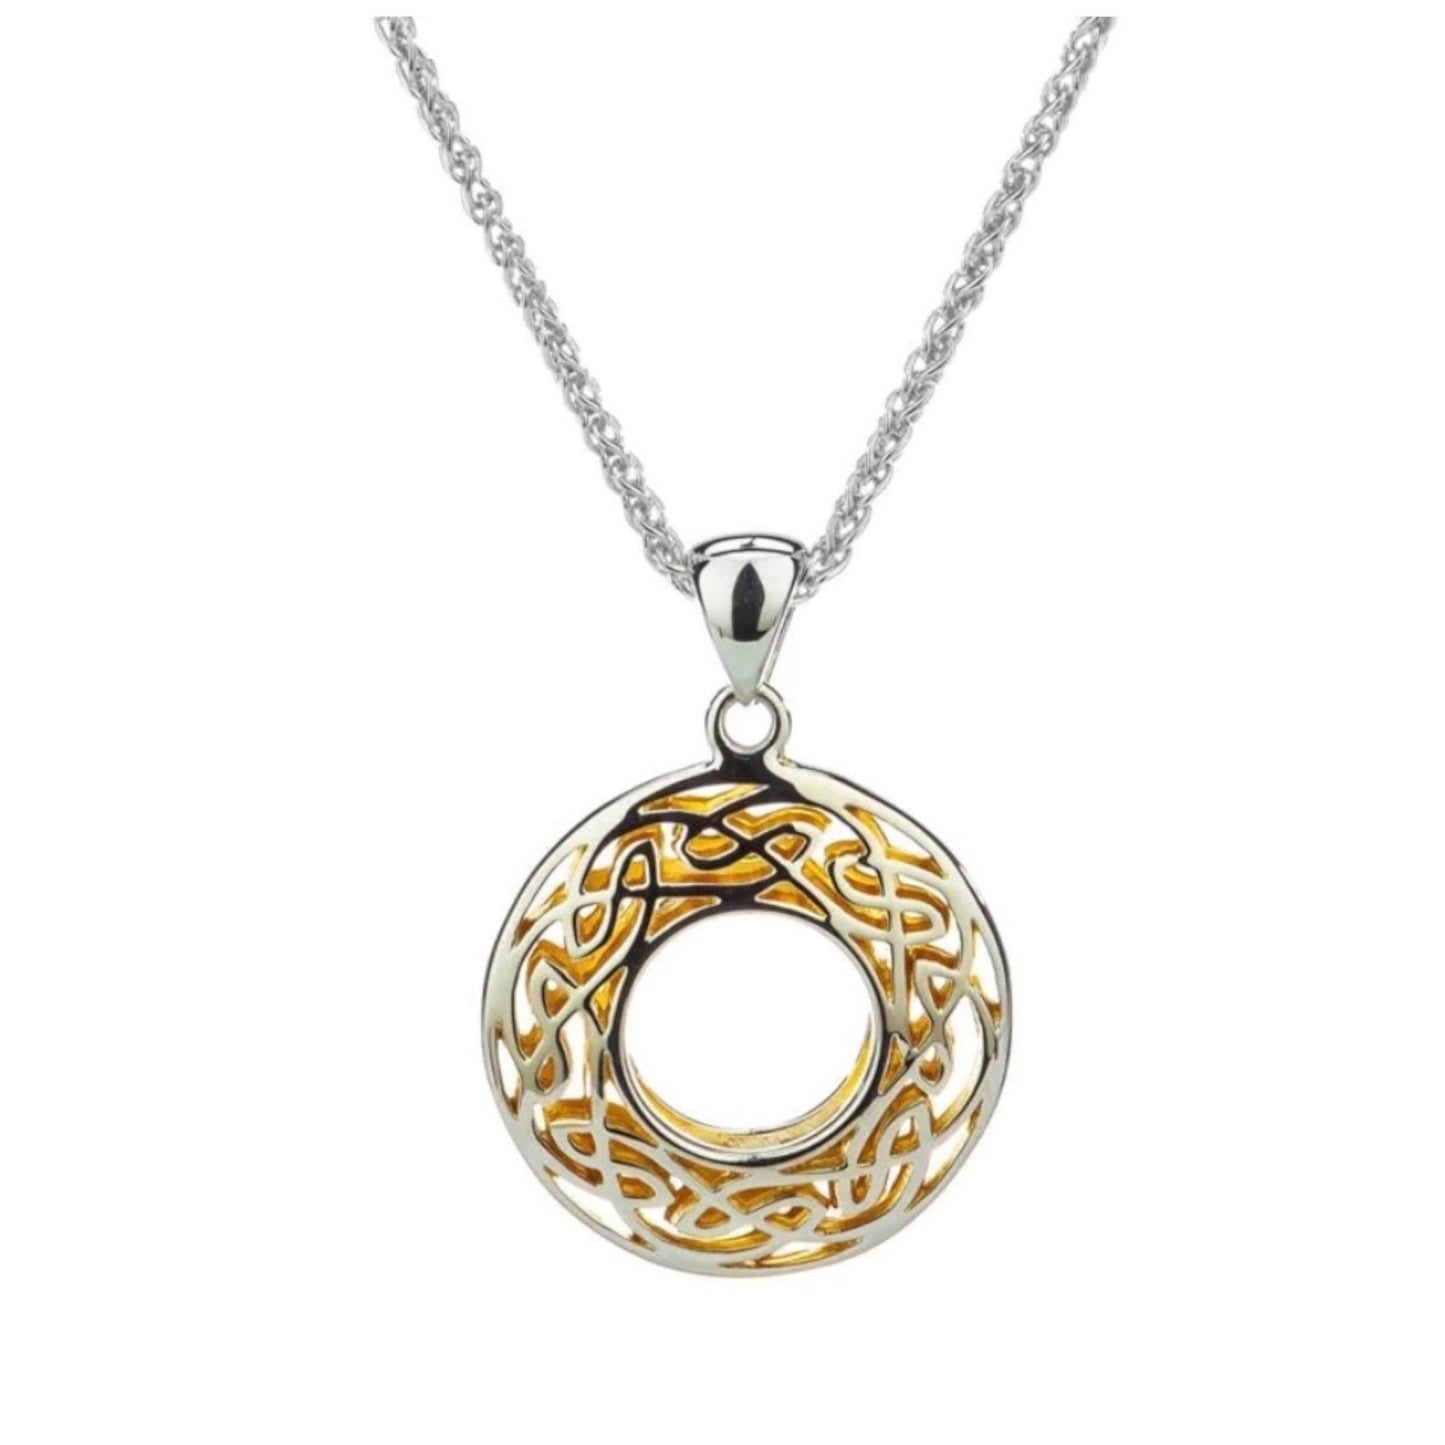 Keith Jack - Silver with 22K Gold Gliding Window to the Soul Round Pendant Small